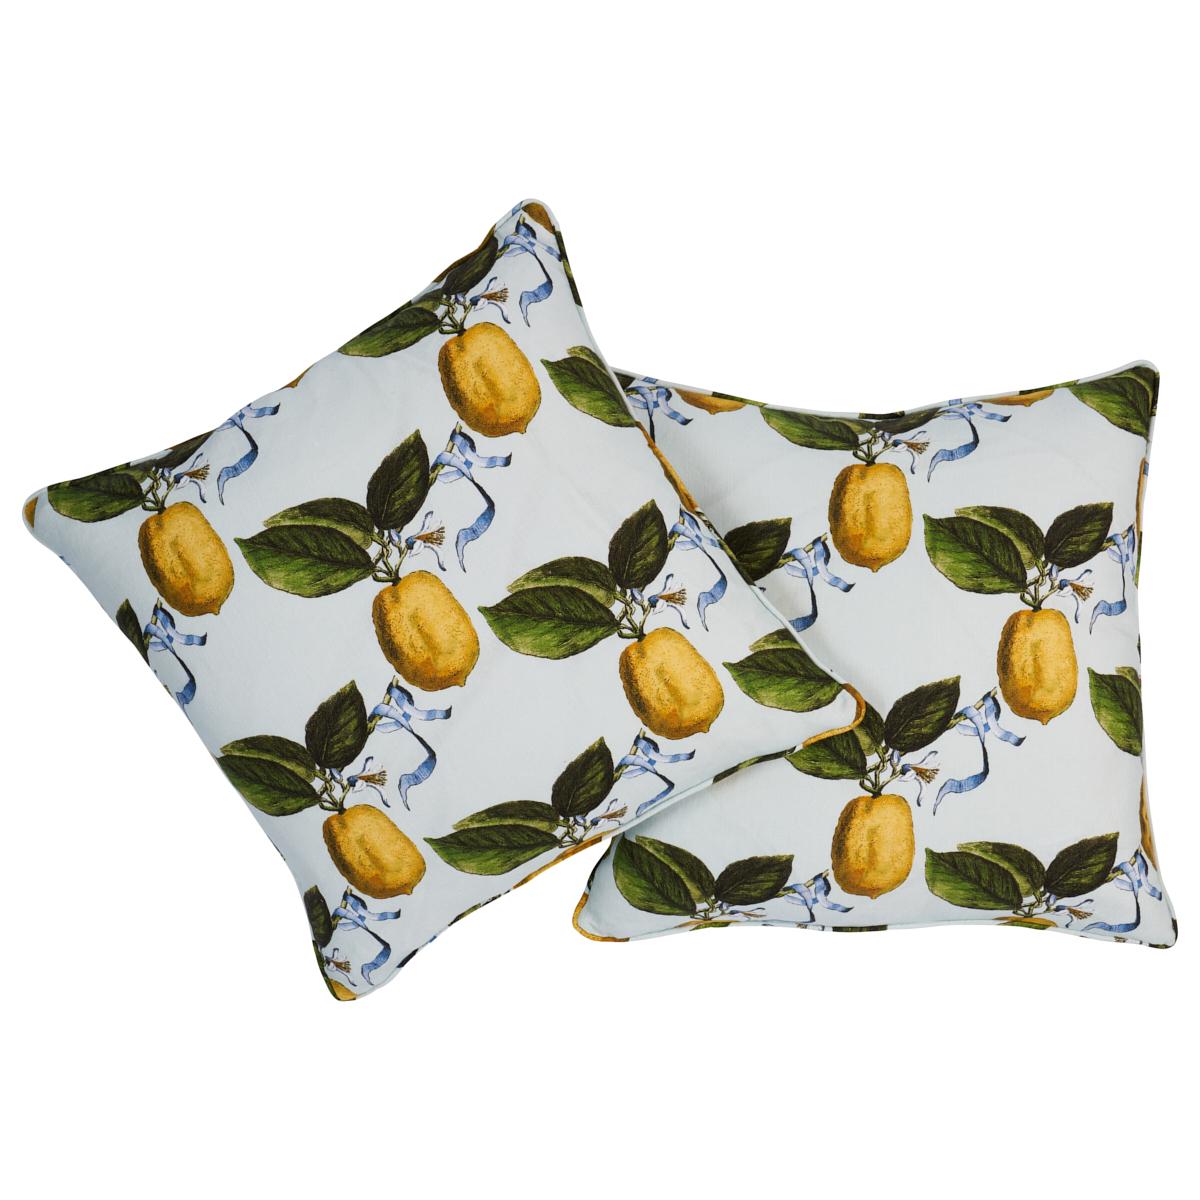 This pillow features Le Citron by Johnson Hartig for Libertine for Schumacher with a self welt finish. Le Citron in sky is a wonderfully charming fabric design by Johnson Hartig of Libertine. Printed on pure linen, this whimsical lattice of leafy